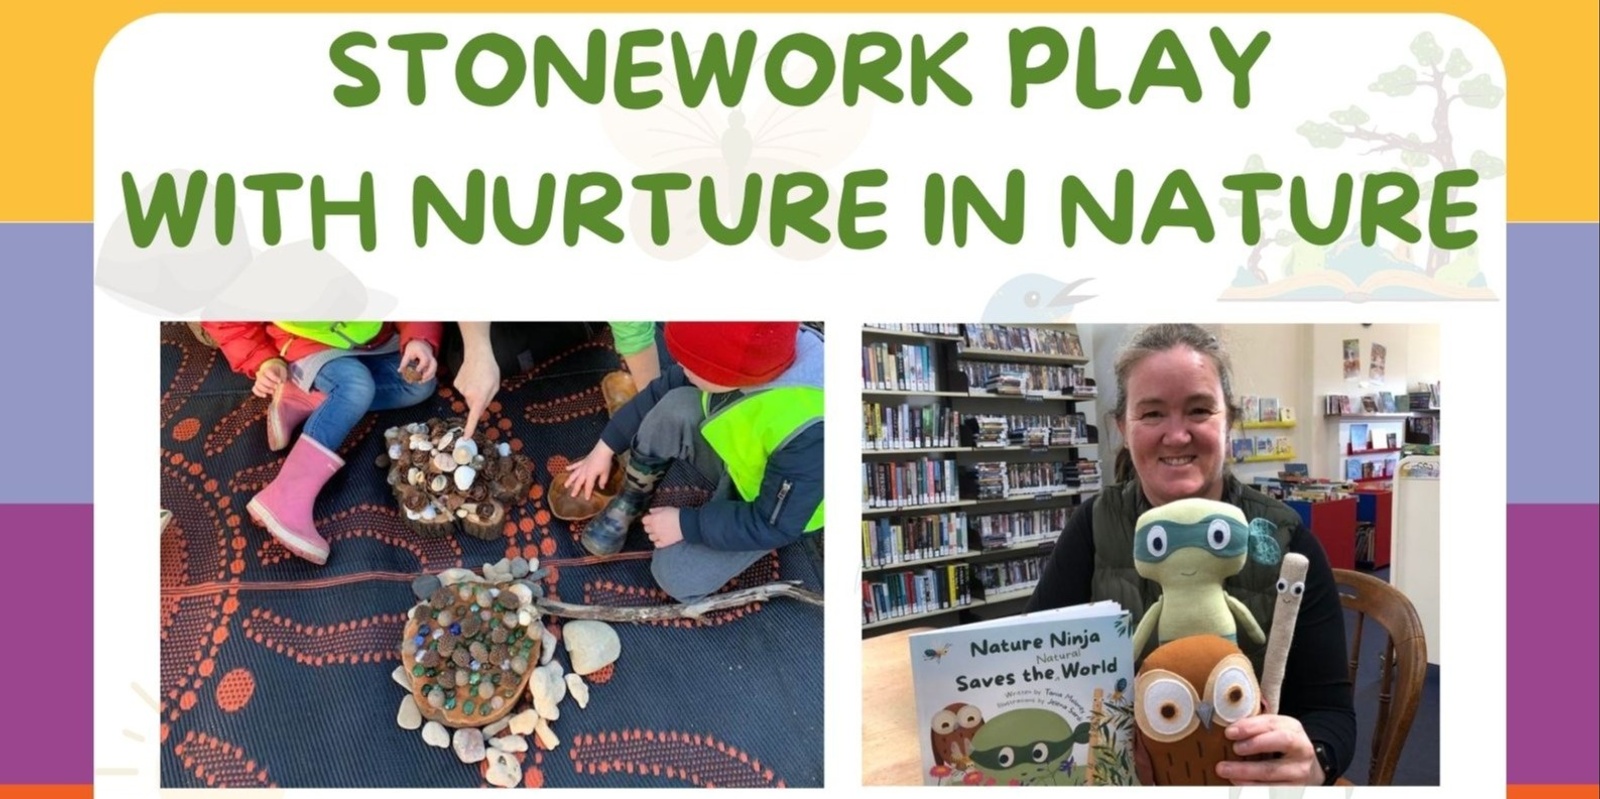 Banner image for Stonework Play with Nurture in Nature - Derrinallum Library